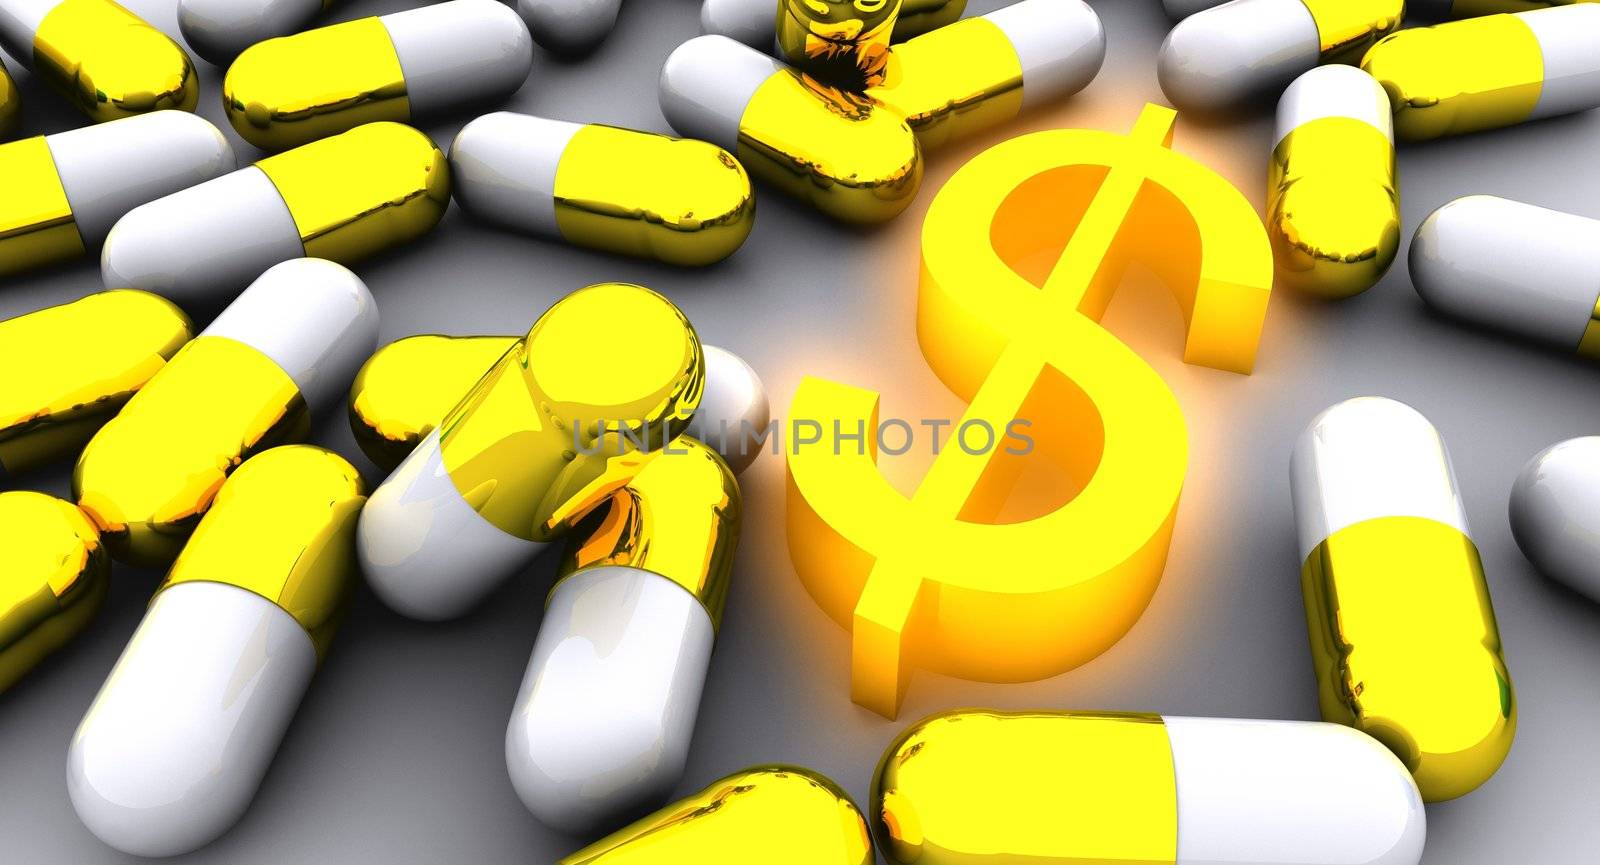 Concept of many golden pills and golden dollar rendered on white background. Concept can be symbolizing highly valuable cure, expensive health care, or treatment of complicated economical situation.